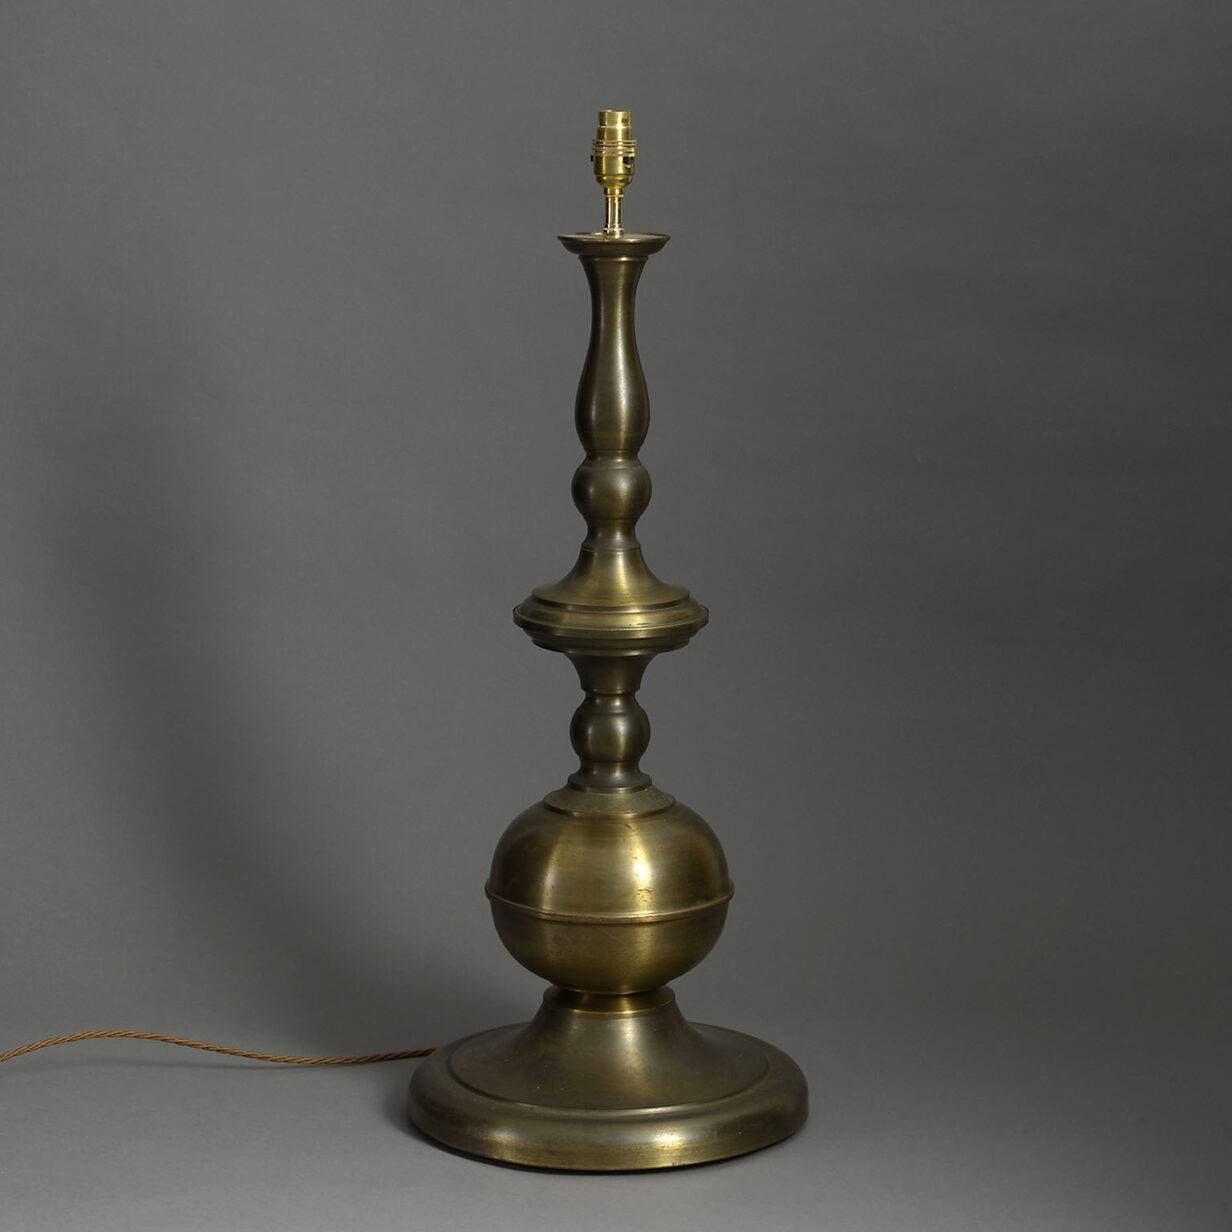 Turned brass table lamp